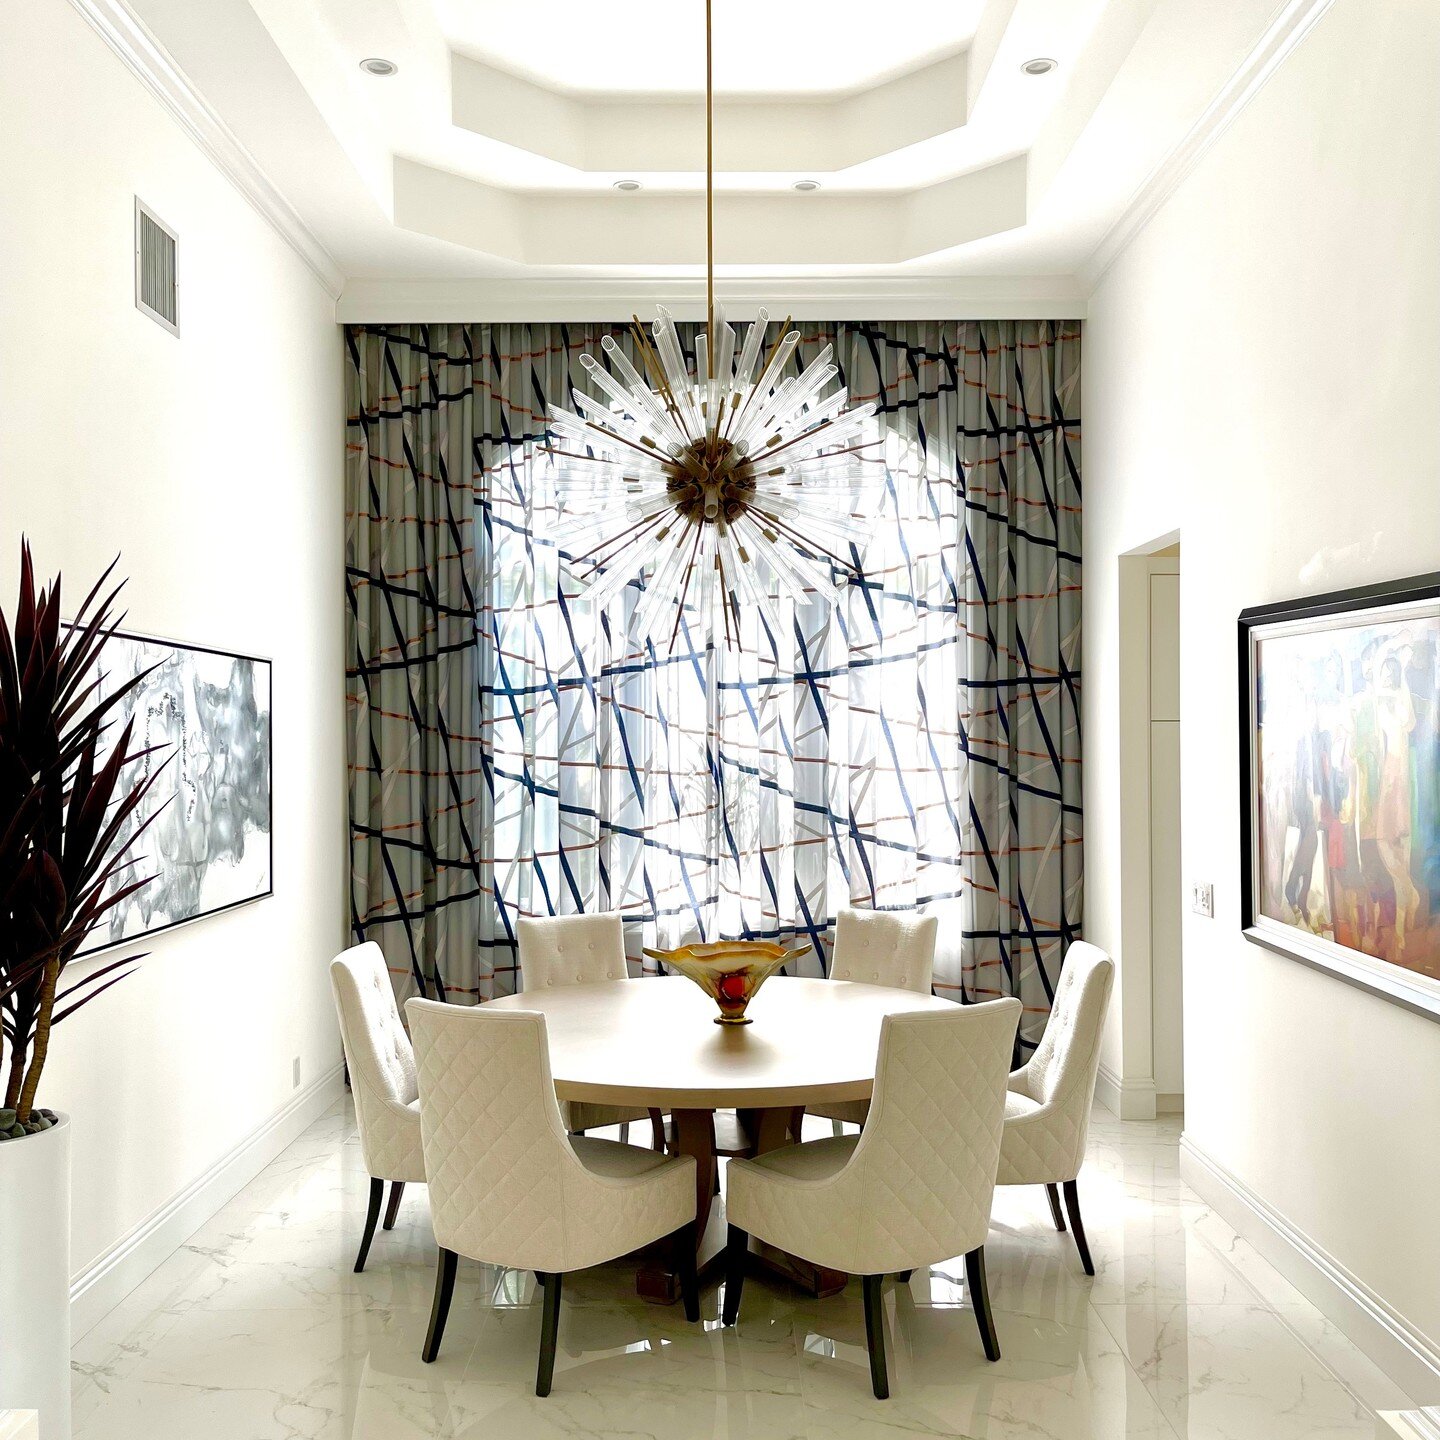 I love how this dining room came out. A wall of drapery (double sheer to help block out bright sun) gives the window wall a beautiful texture and pattern. @harlequinfw @vanguardfurniture #diningroom #diningroomdecor #interiordesign #southflorida #flo